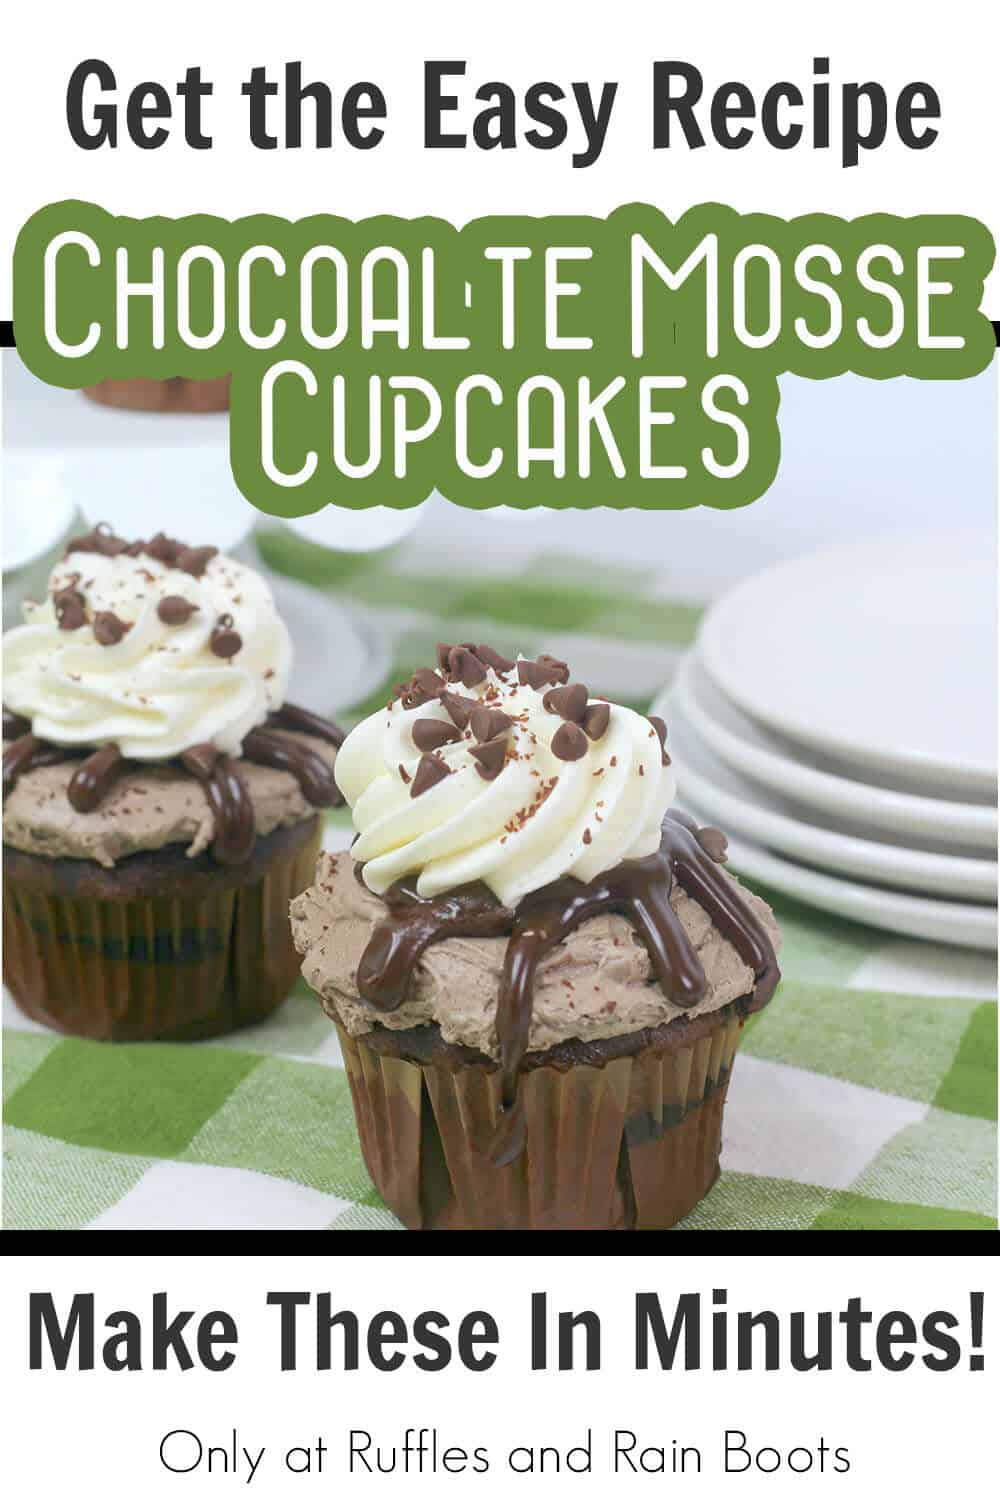 easy cupcakes with mousse icing with text which reads get the easy recipe chocolate mousse cupcakes make these in minutes!